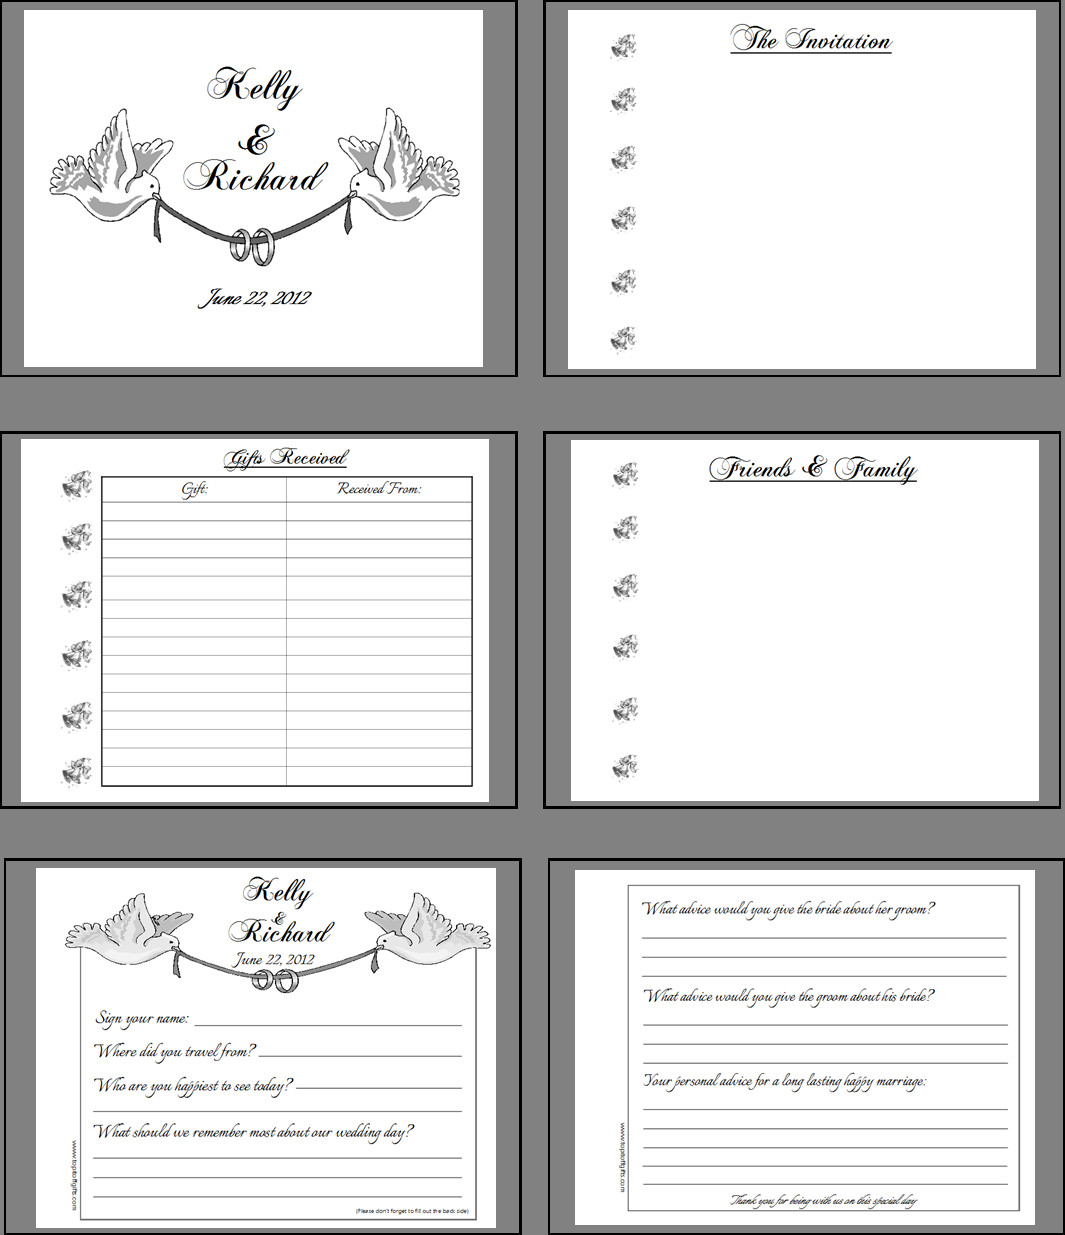 Wedding Guest Book Layout
 Customized Personalized Wedding Guest Book Alternatives